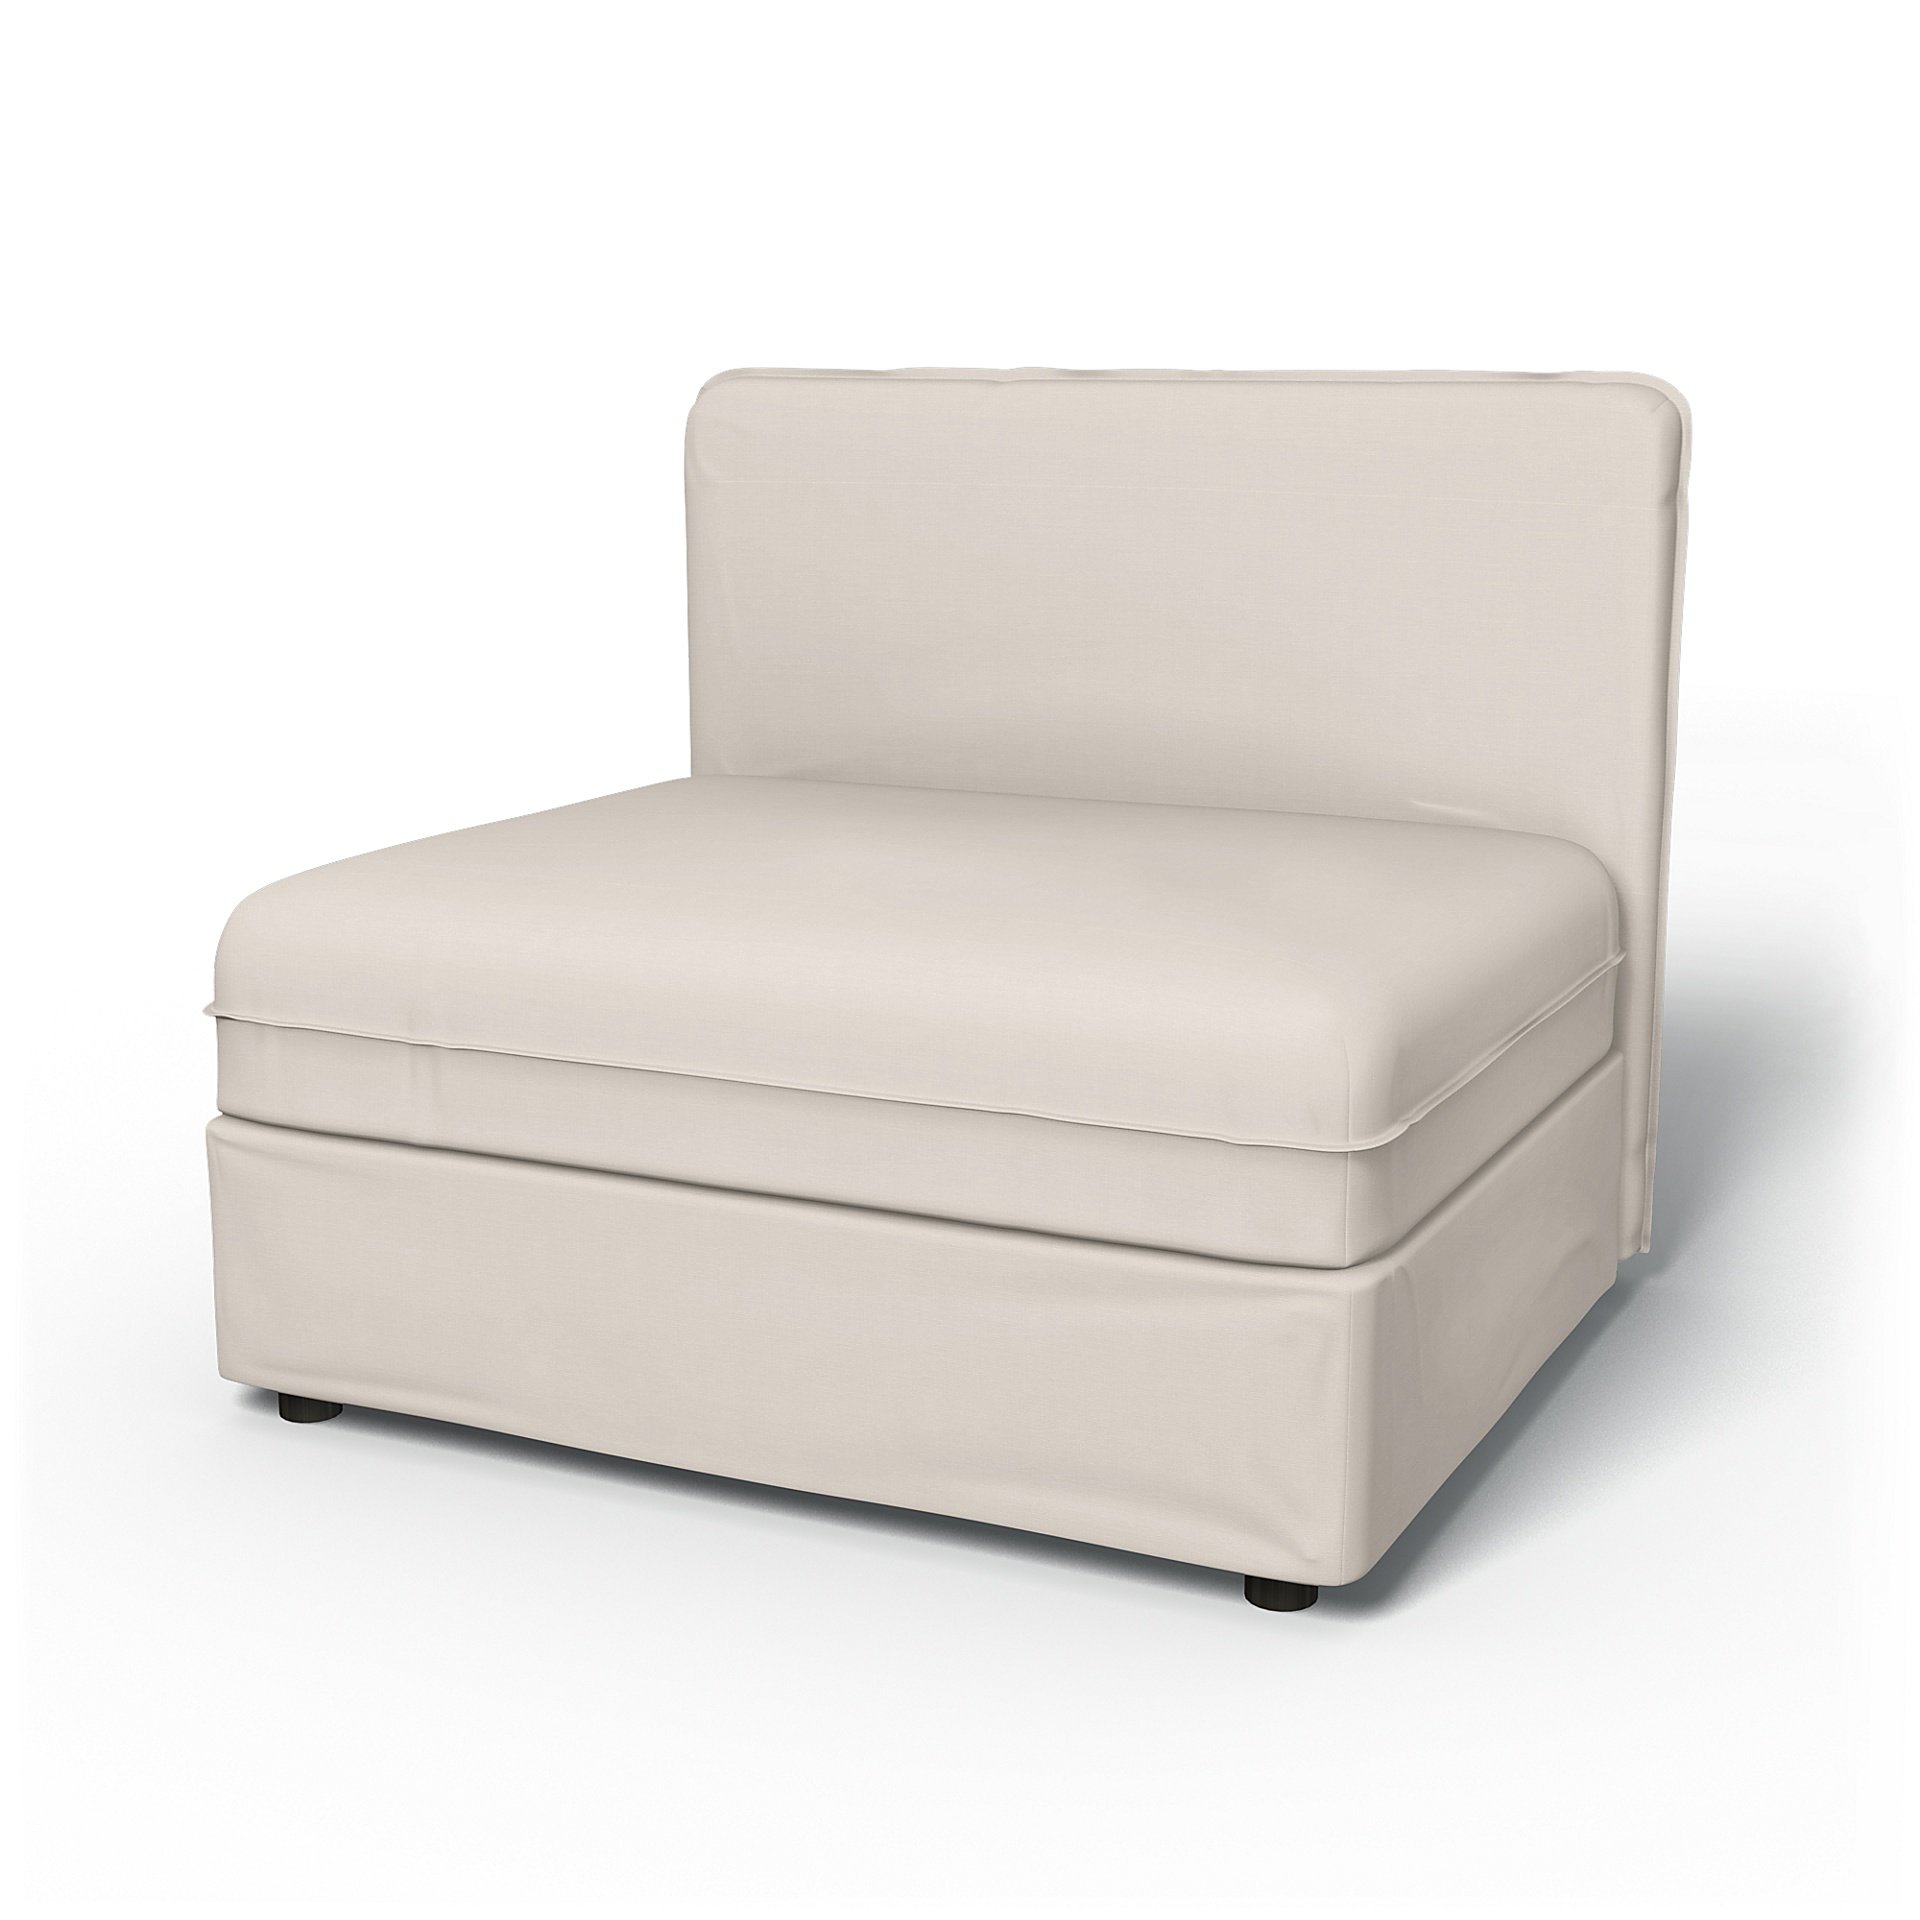 IKEA - Vallentuna Seat Module with Low Back Cover 100x80cm 39x32in, Soft White, Cotton - Bemz